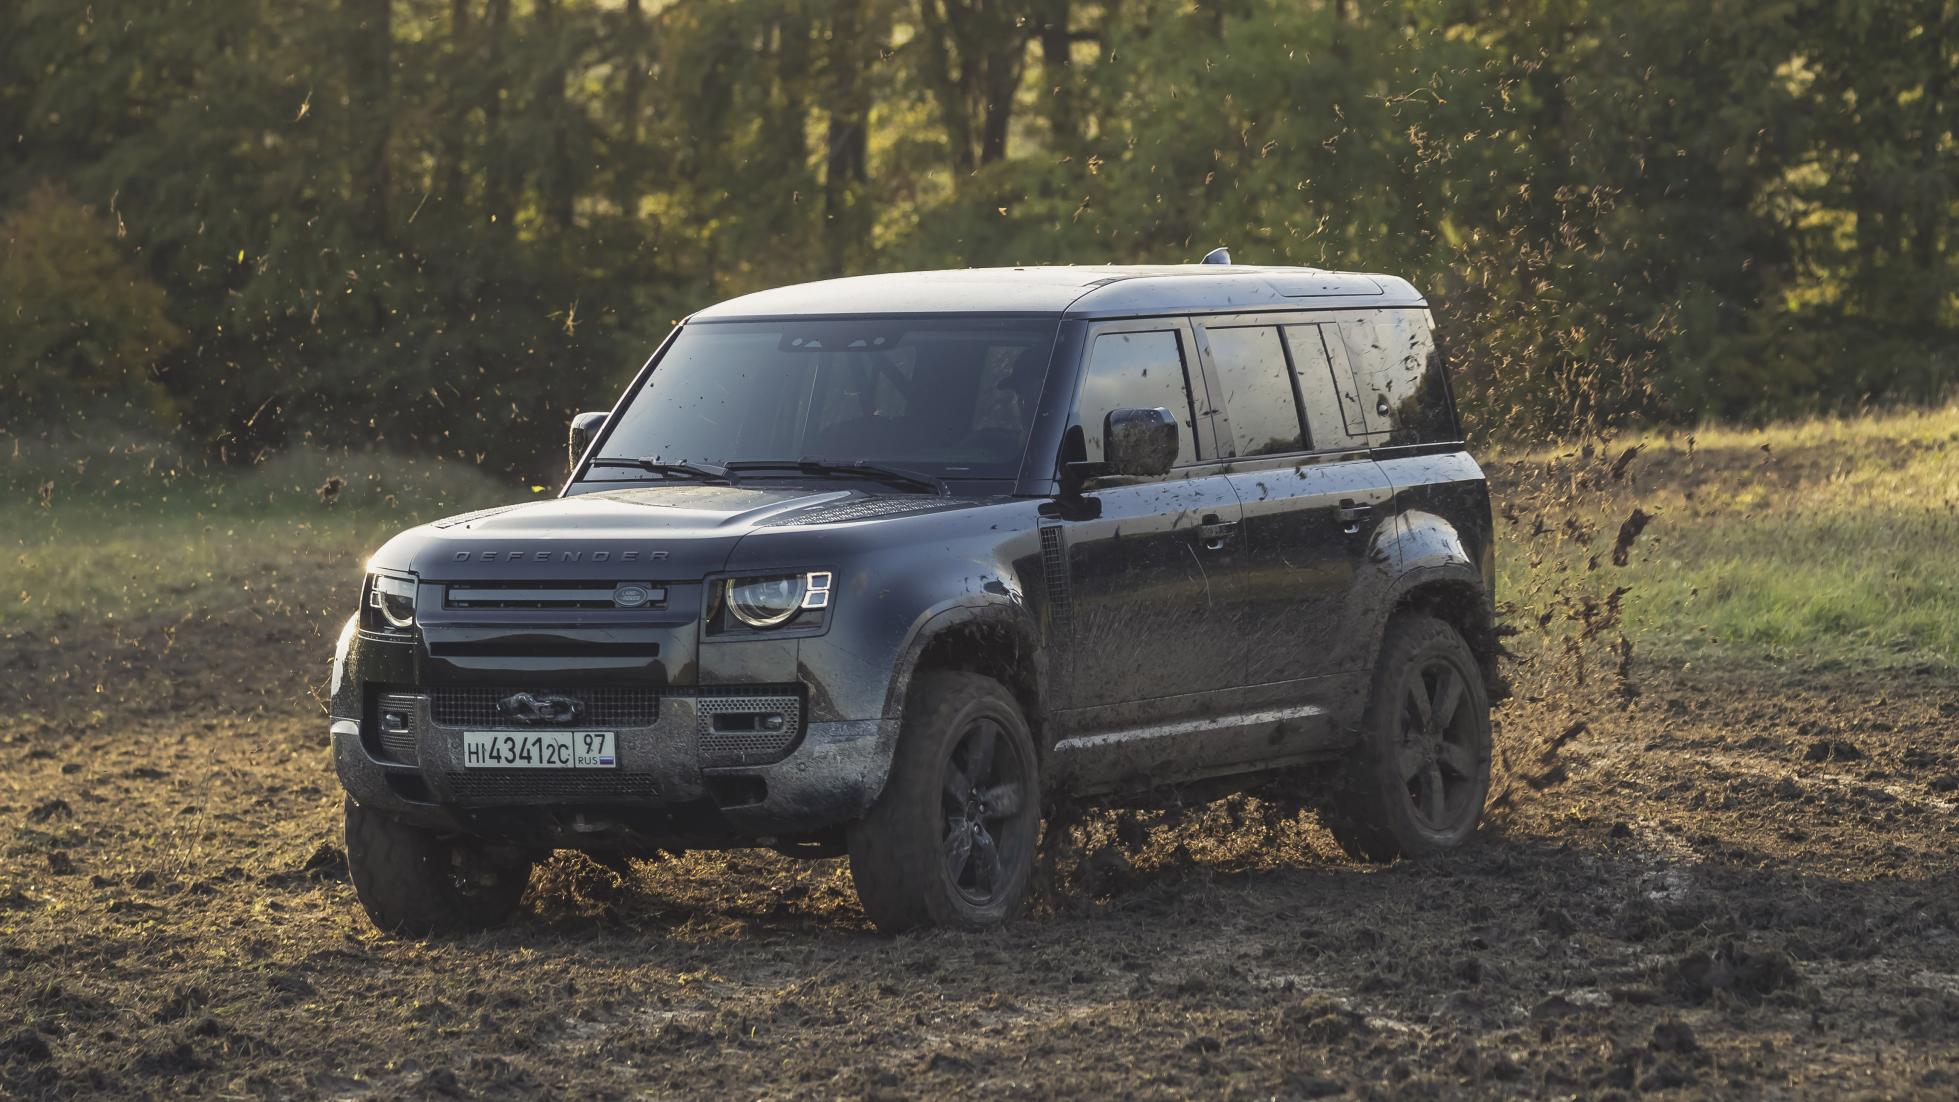 Check out these images of the new Defender in Bond